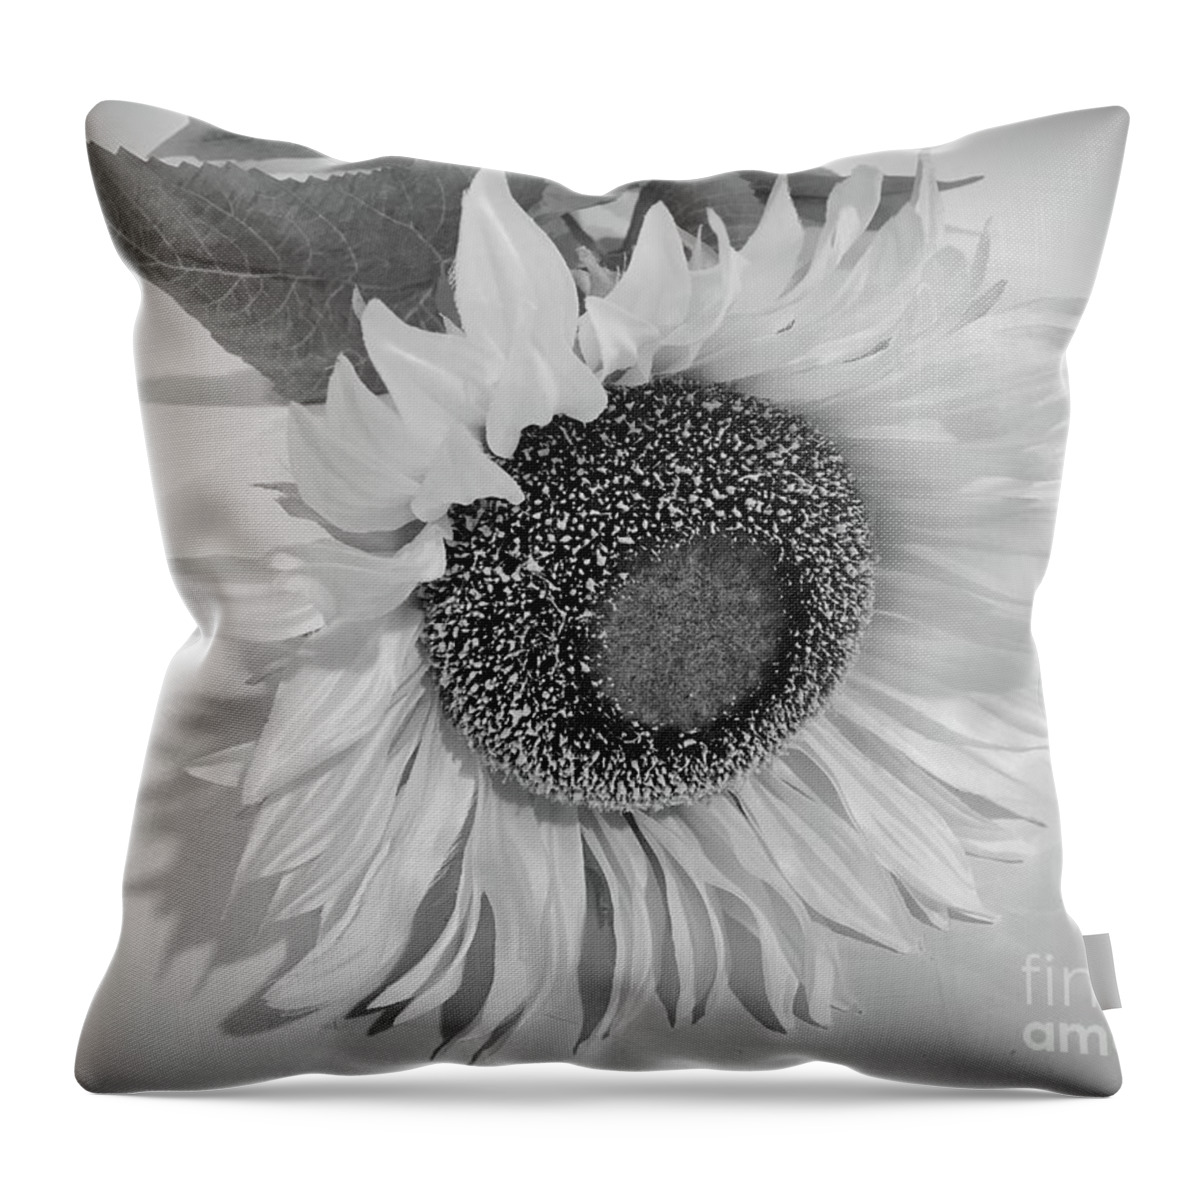 Art Throw Pillow featuring the photograph Sunflower In Monochrome by Jeannie Rhode